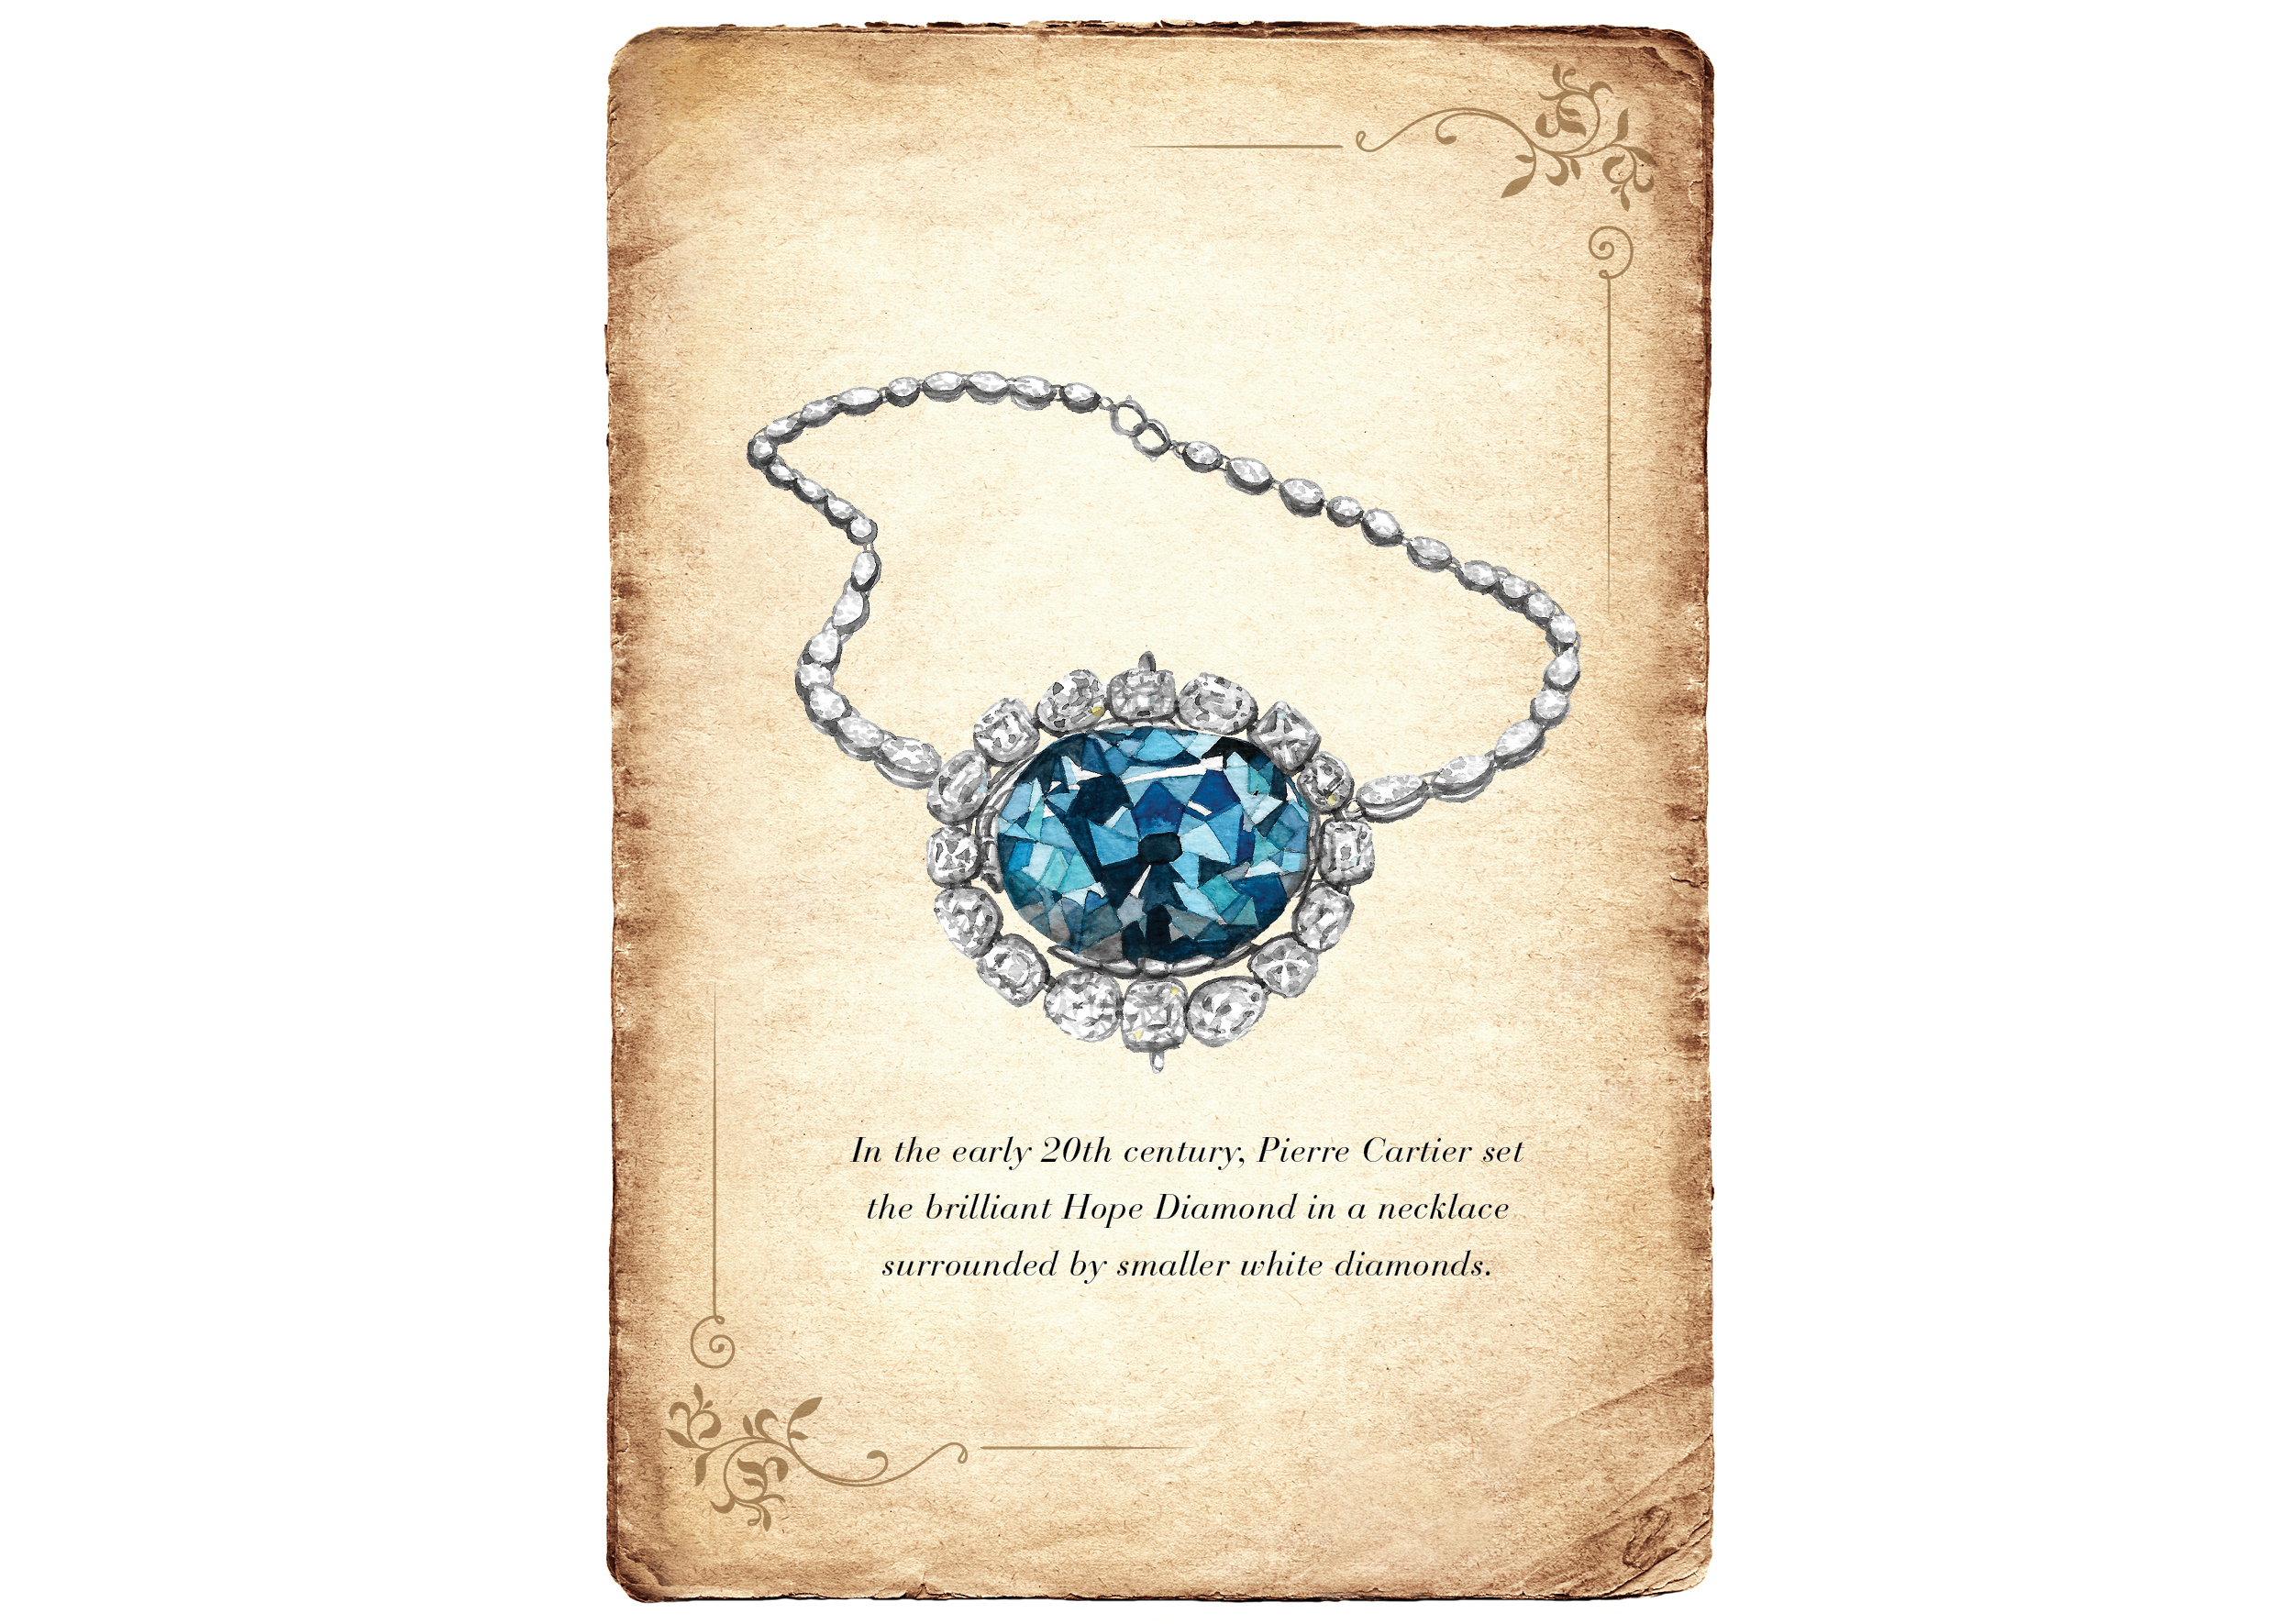 Hope Diamond in the necklace by Pierre Cartier